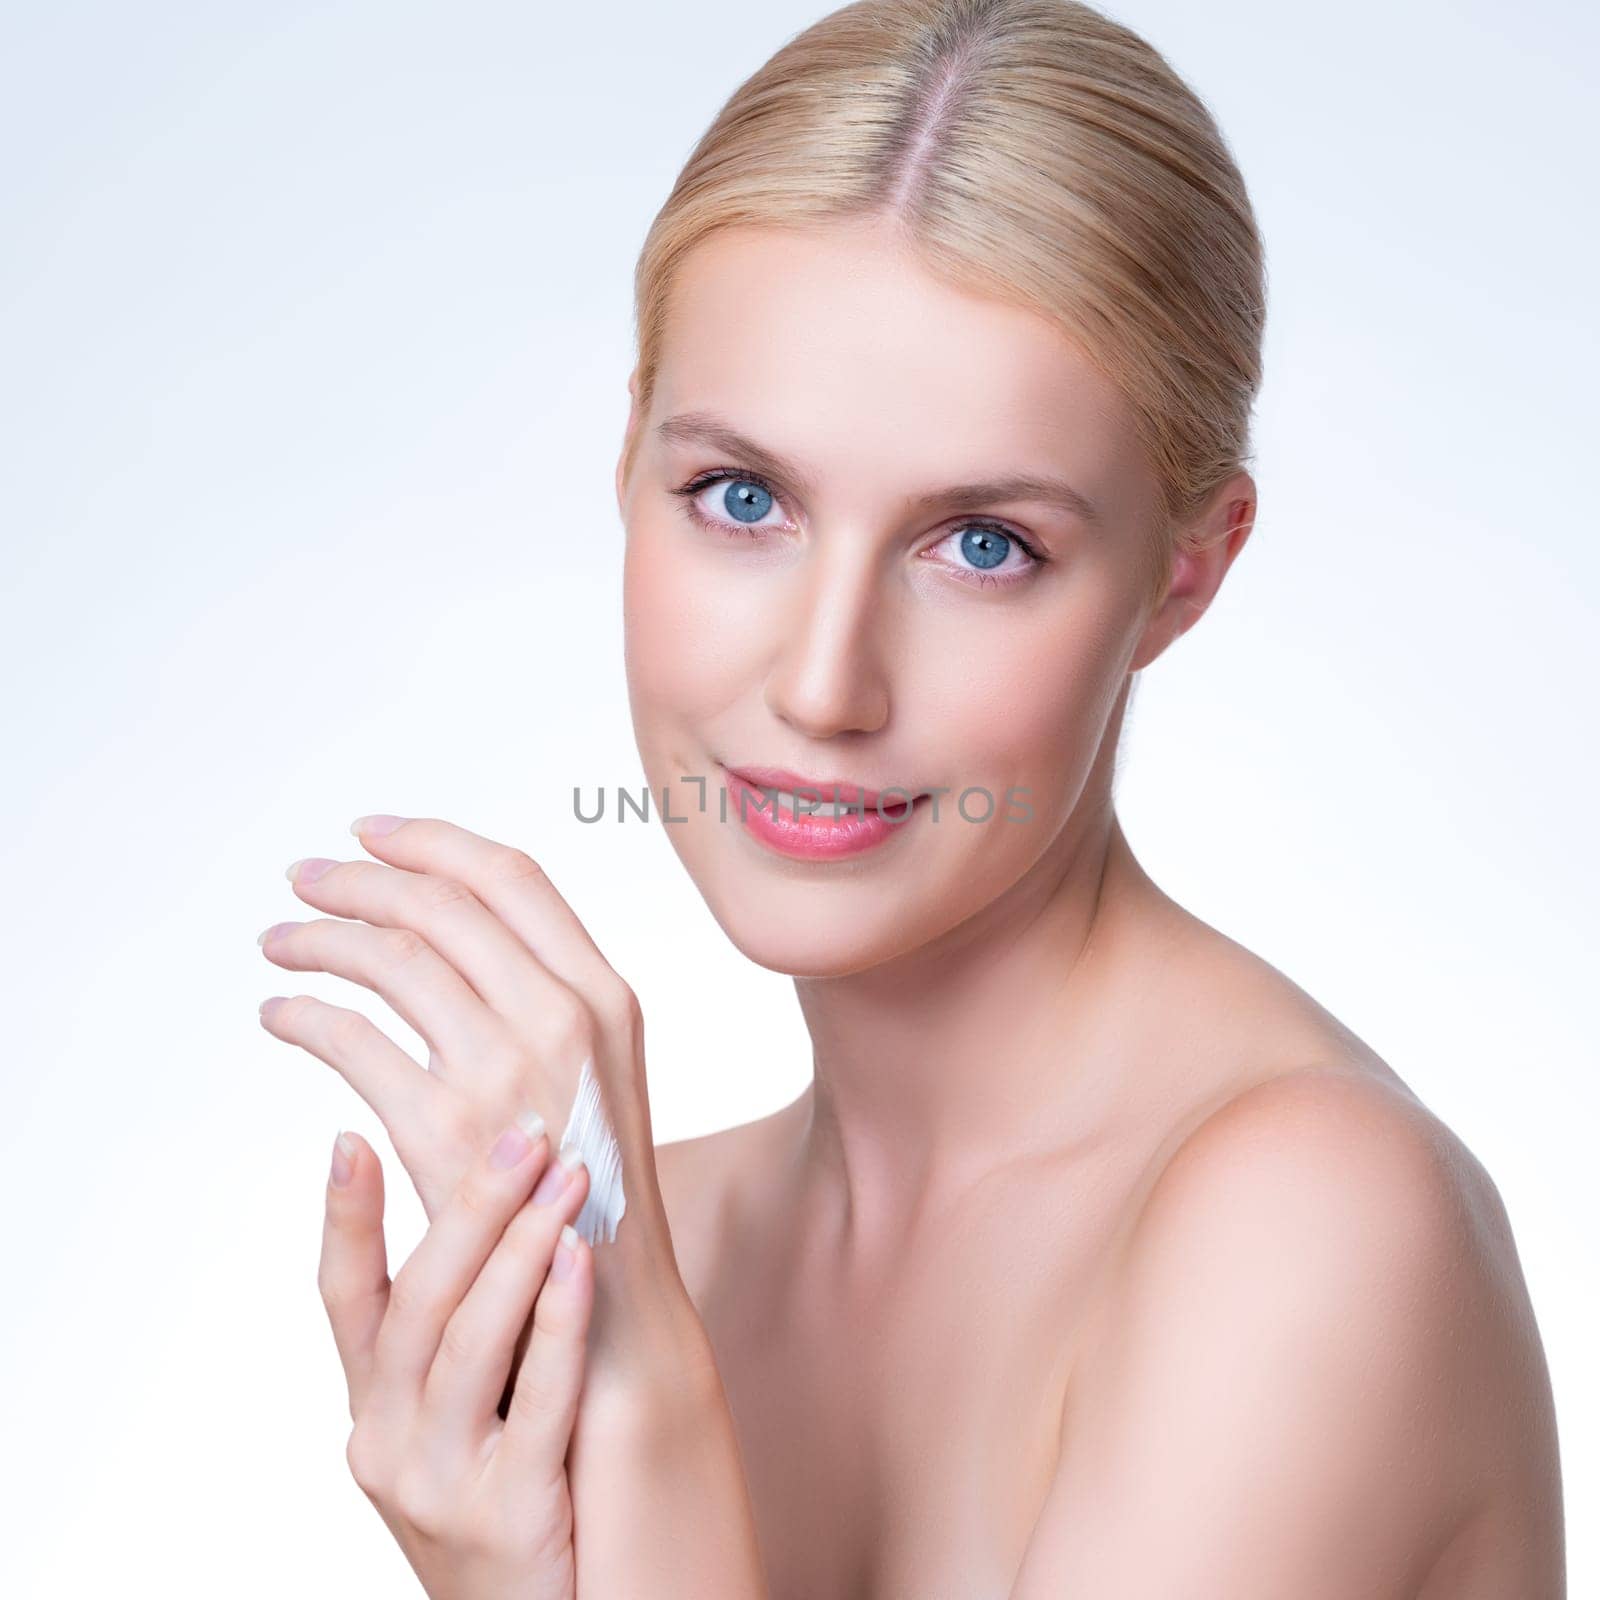 Personable woman applying moisturizer cream on her han in isolated background. by biancoblue